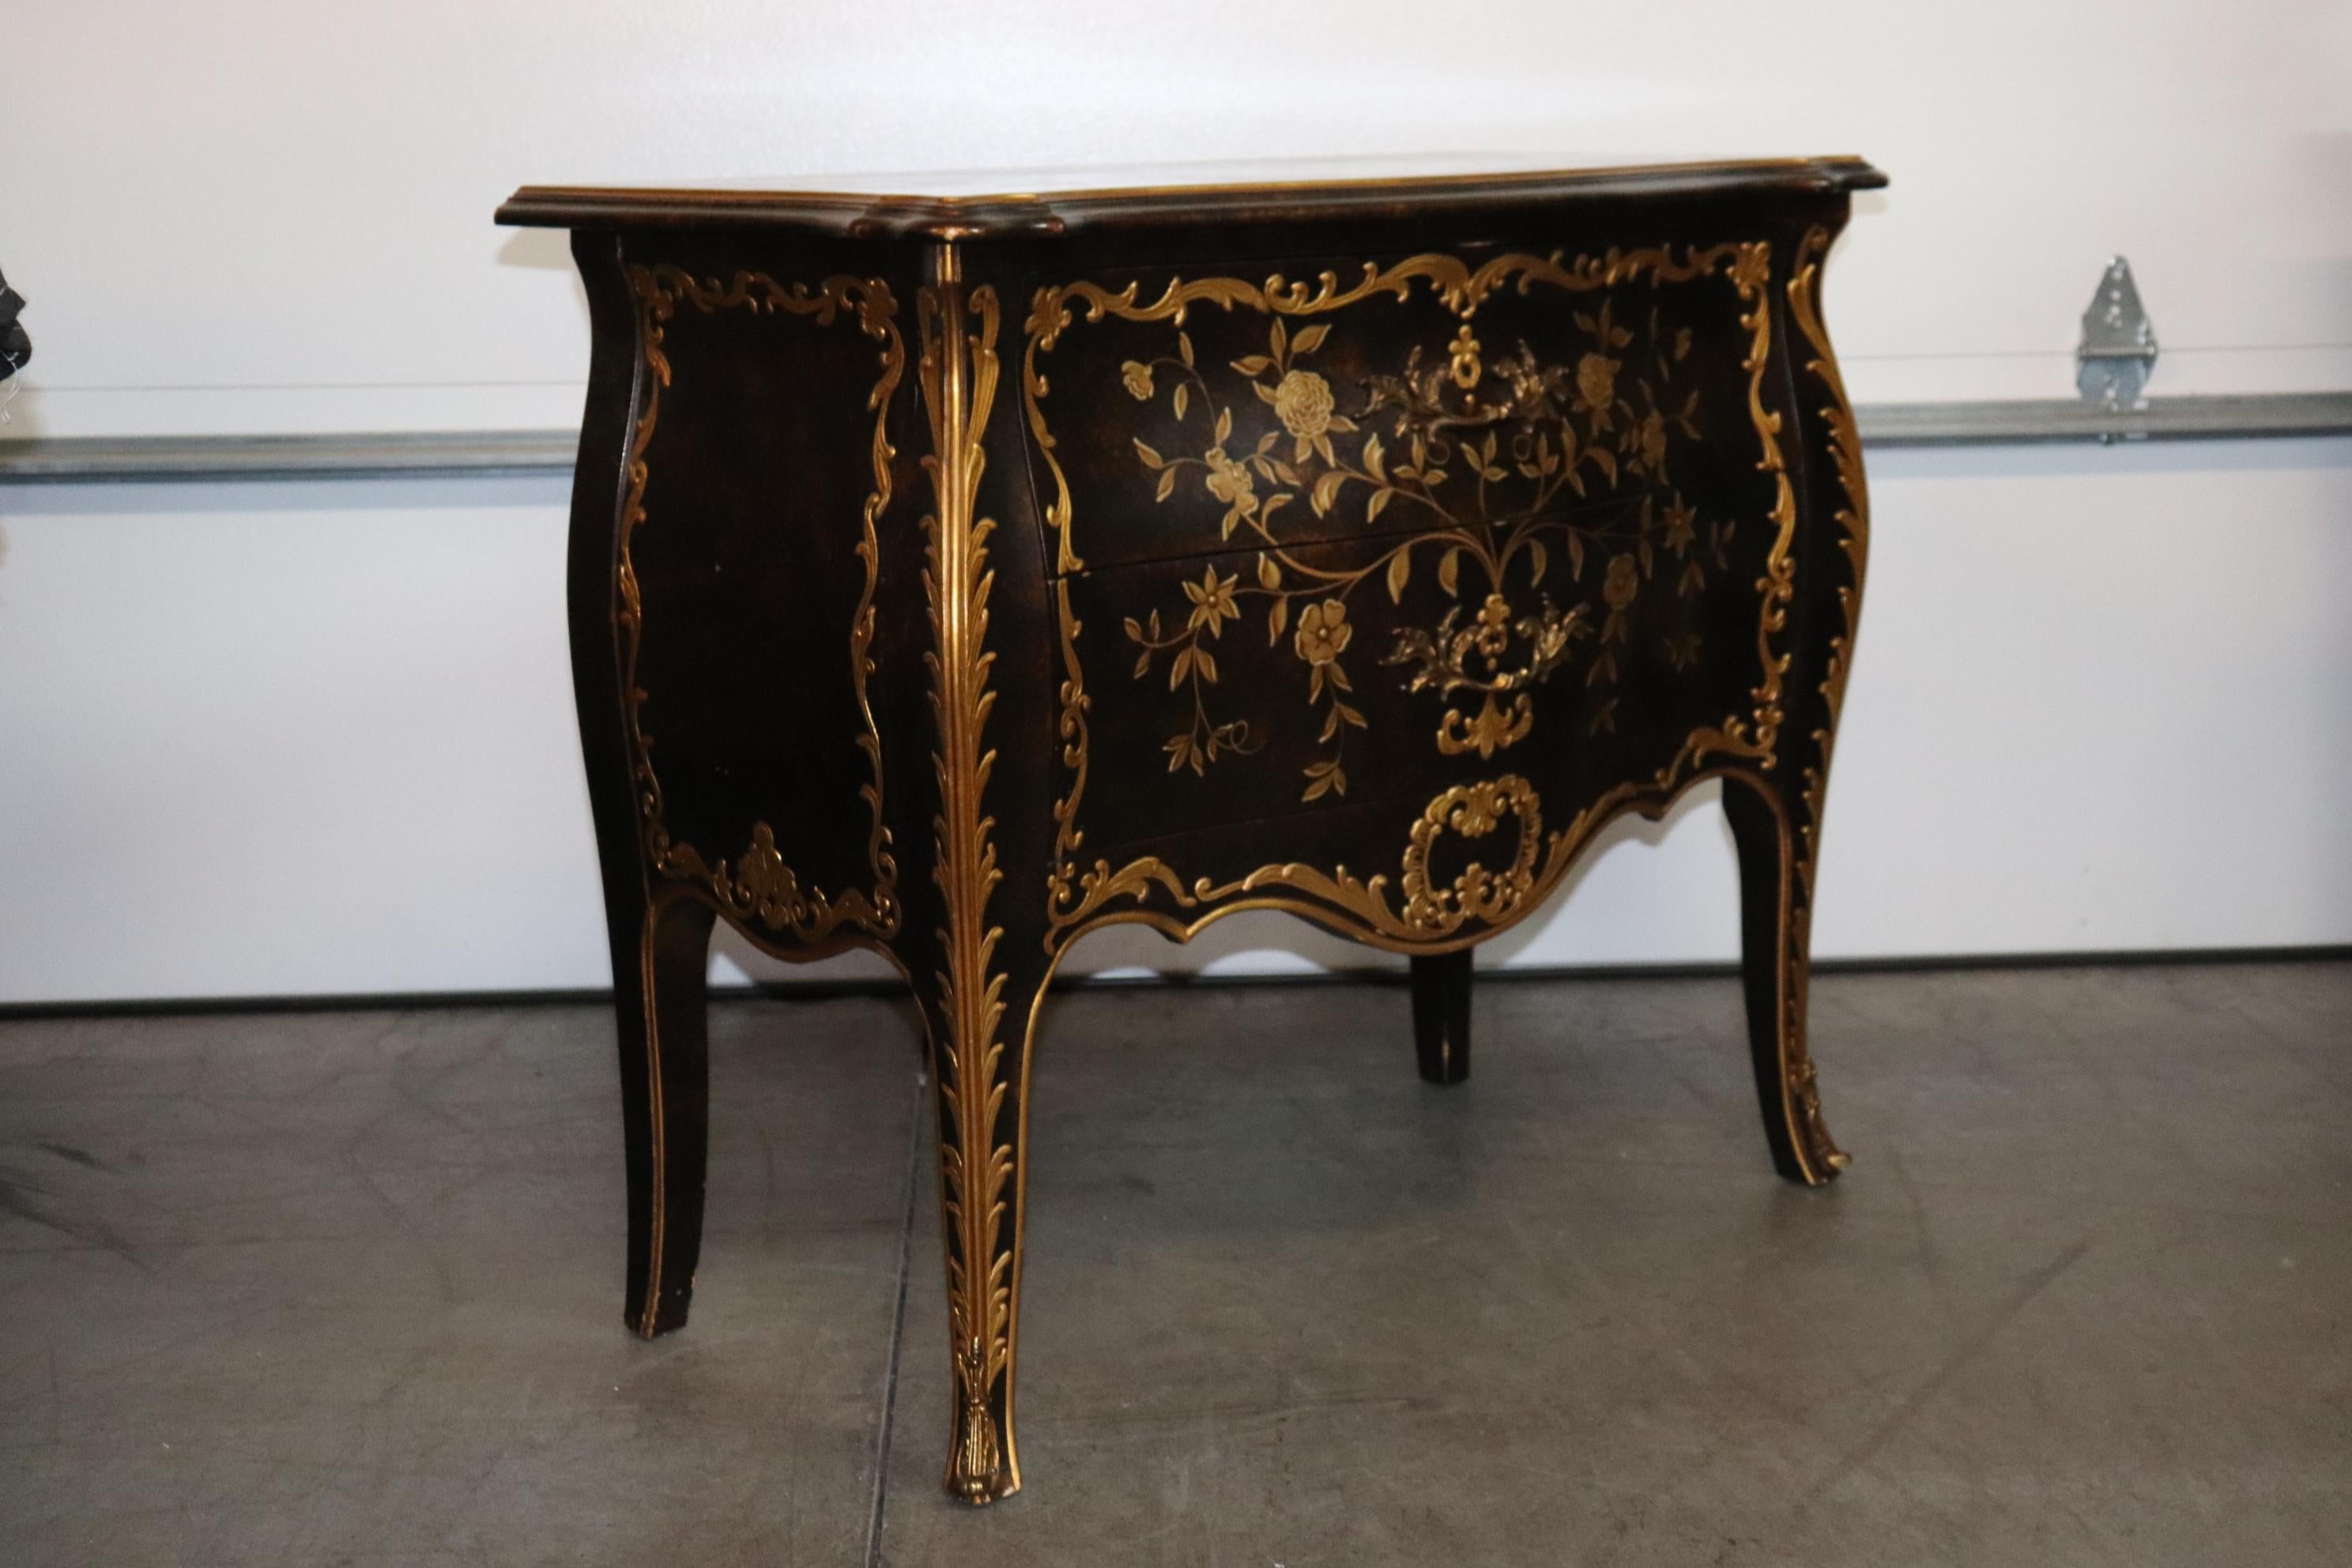 This is a superbly hand-painted masterpiece by one of the nation's finest manufacturers of furniture, John Widdicomb. The commode is designed in the Louis XV style and features wonderful bronze ormolu and the design is stunning. The piece measures